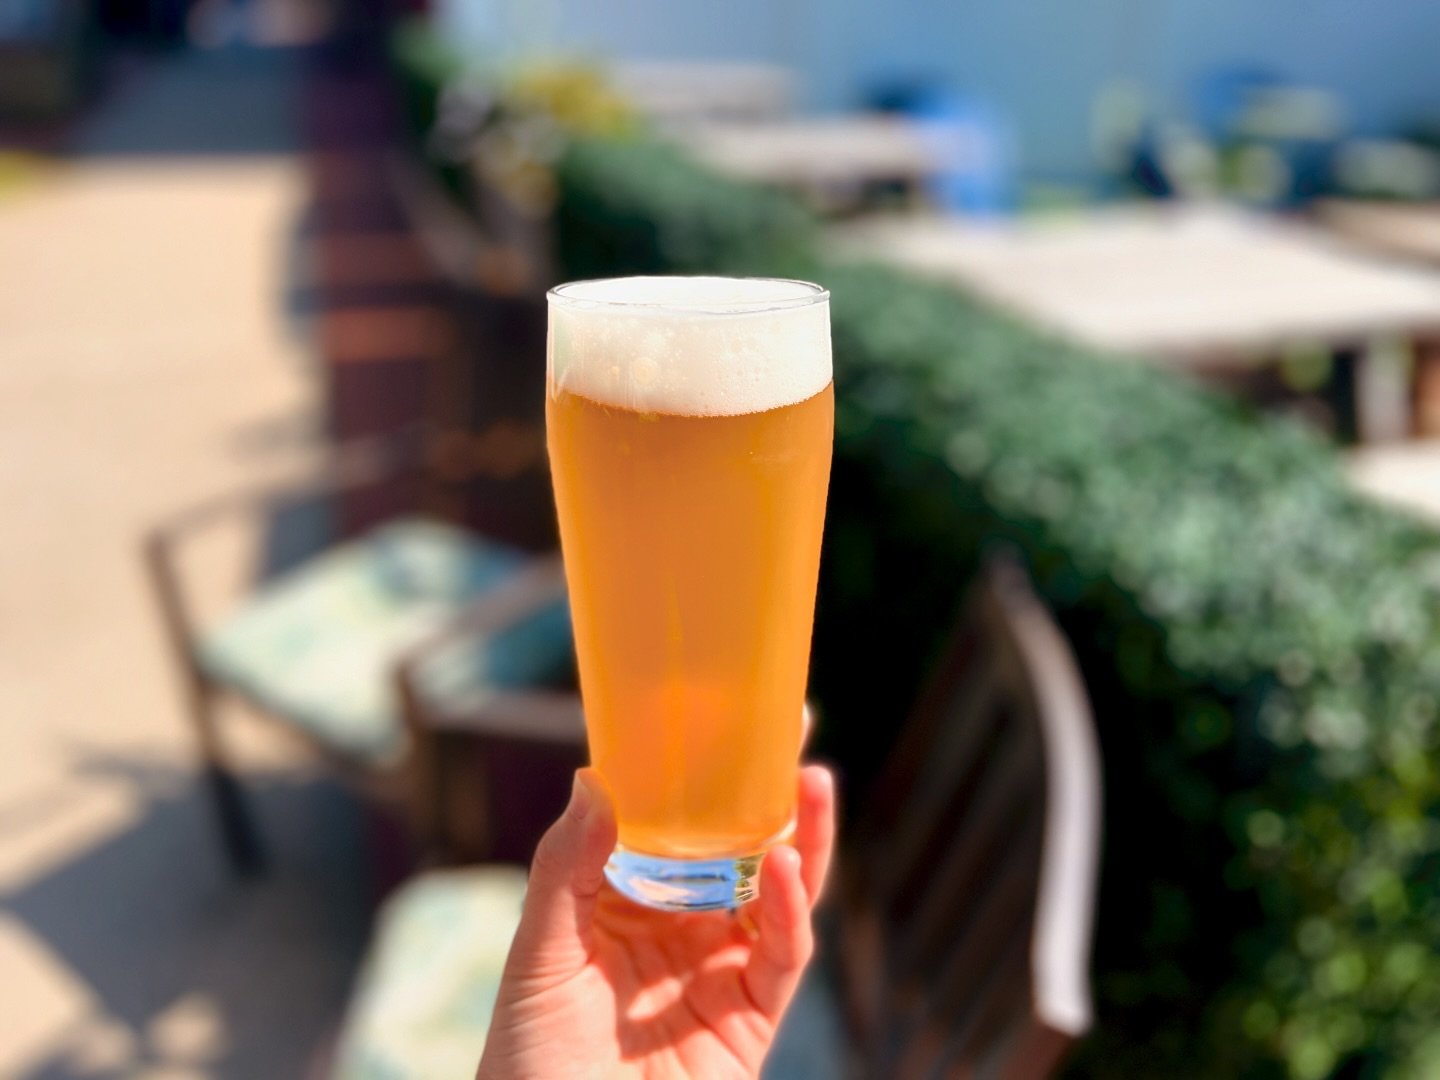 A perfect day to crush a few of these; Hectic - Tangelo &amp; Orange Golden Ale, 5.5% ☀️🍊🍻✨ A few months ago our buds from @goldenhourbooking came up with an idea for this beer, so we brewed it, and it has become quite the crowd pleaser. It&rsquo;s